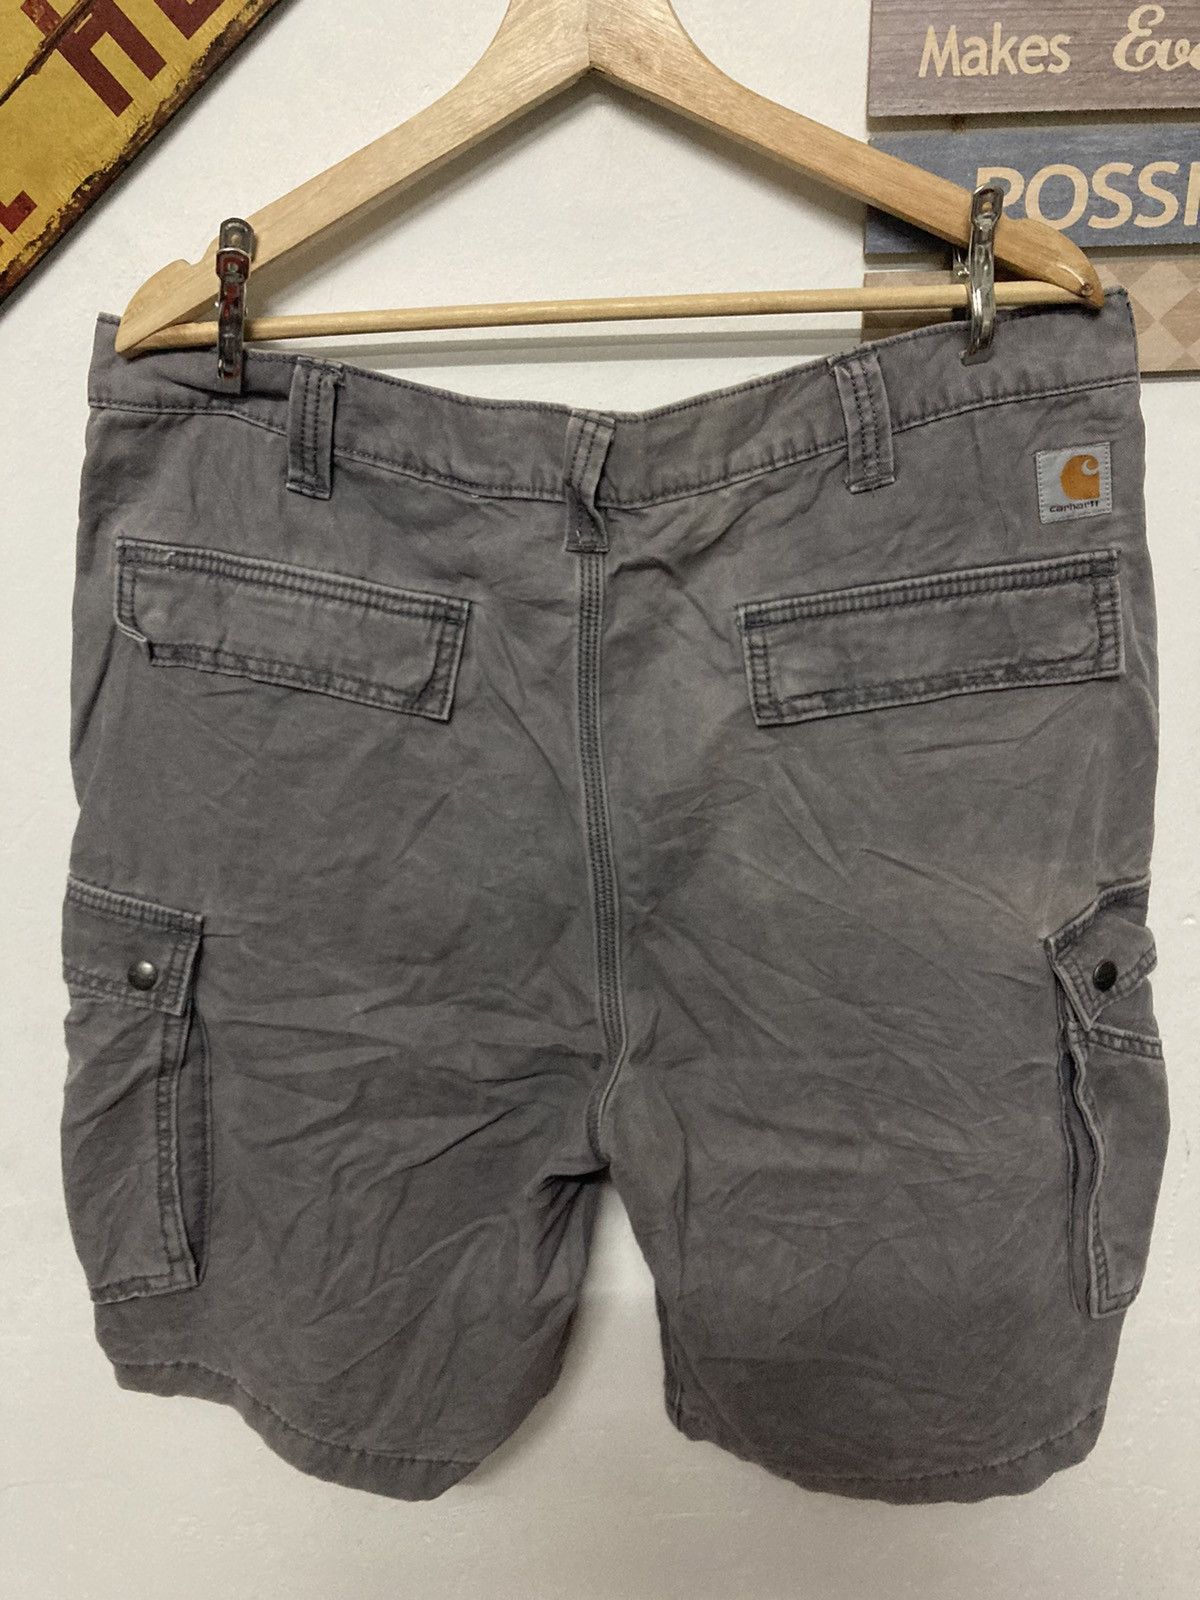 Vintage - Carhatt Relaxed Fit Cargo Short Pant Size 38 - 5